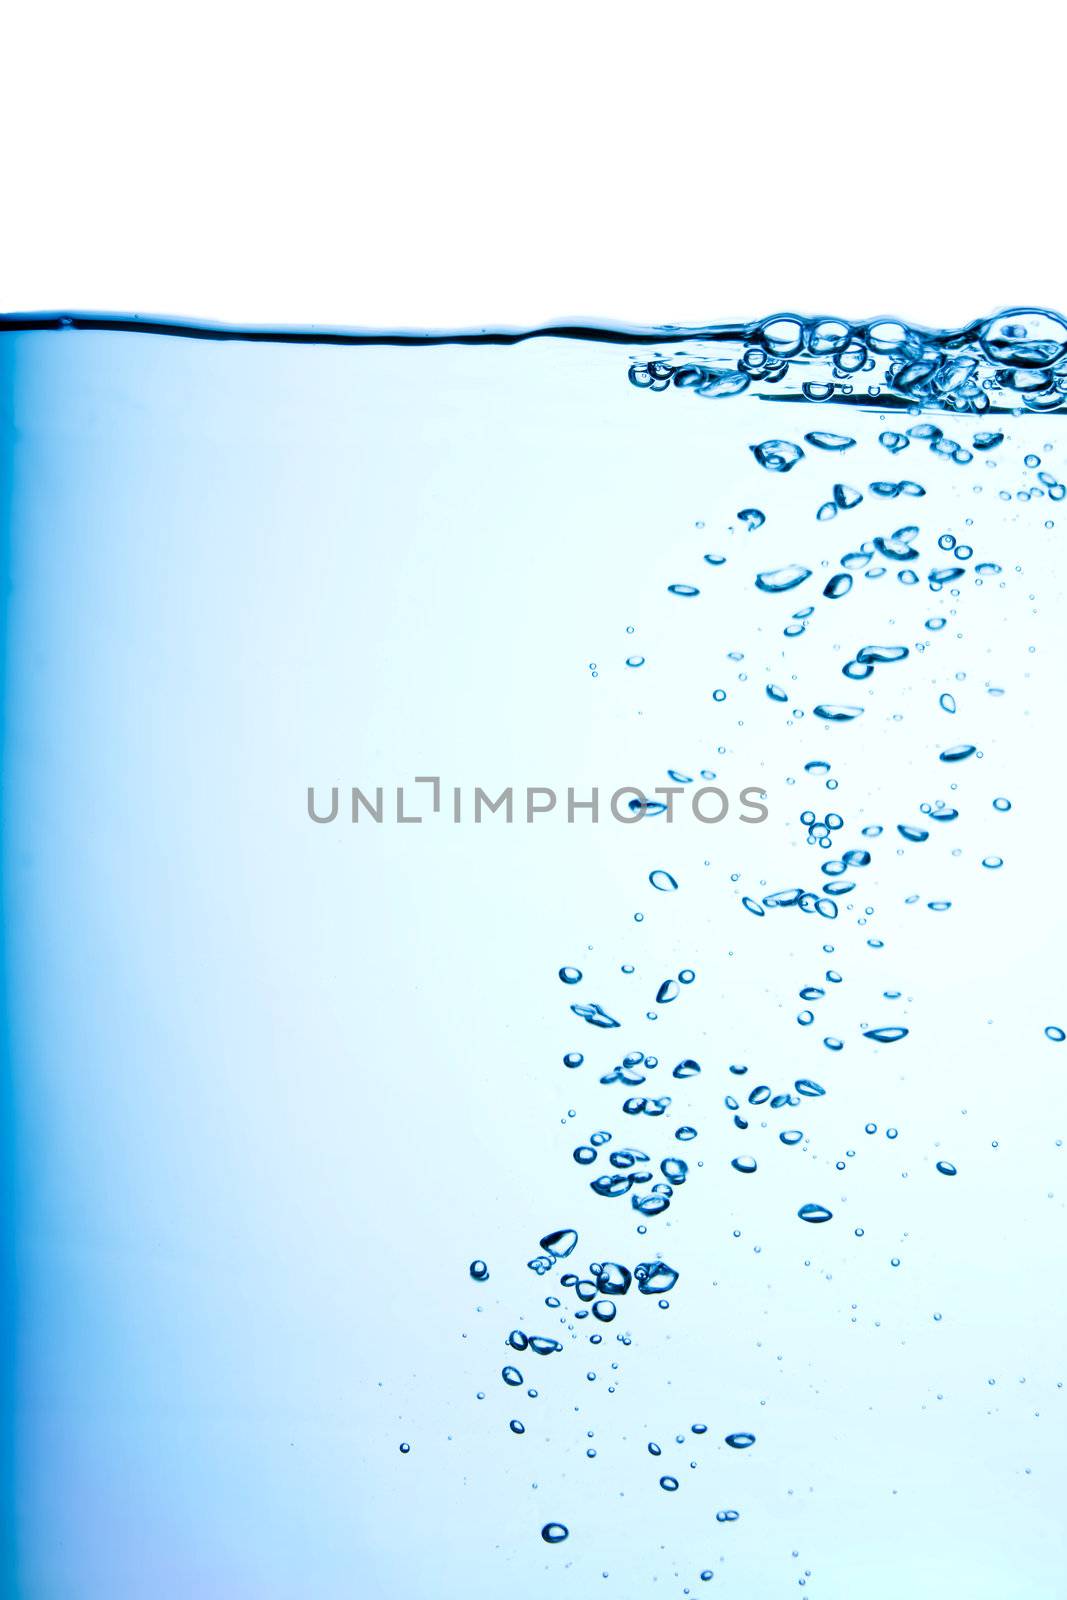 A background abstract of bubbles floating to the surface of water